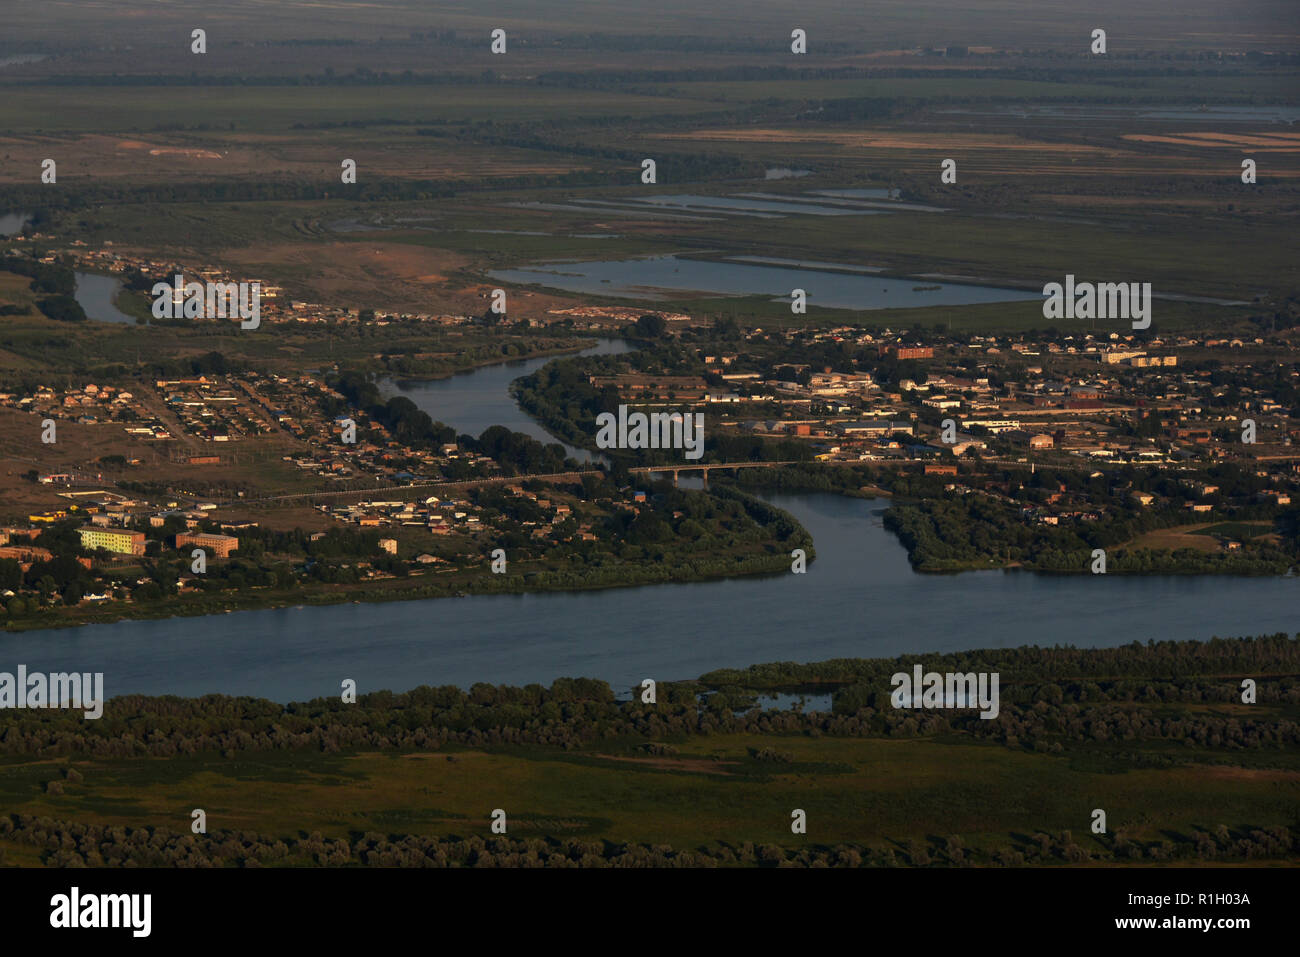 The Volga Delta river aerial view in Astrakhan region, Russia Stock Photo